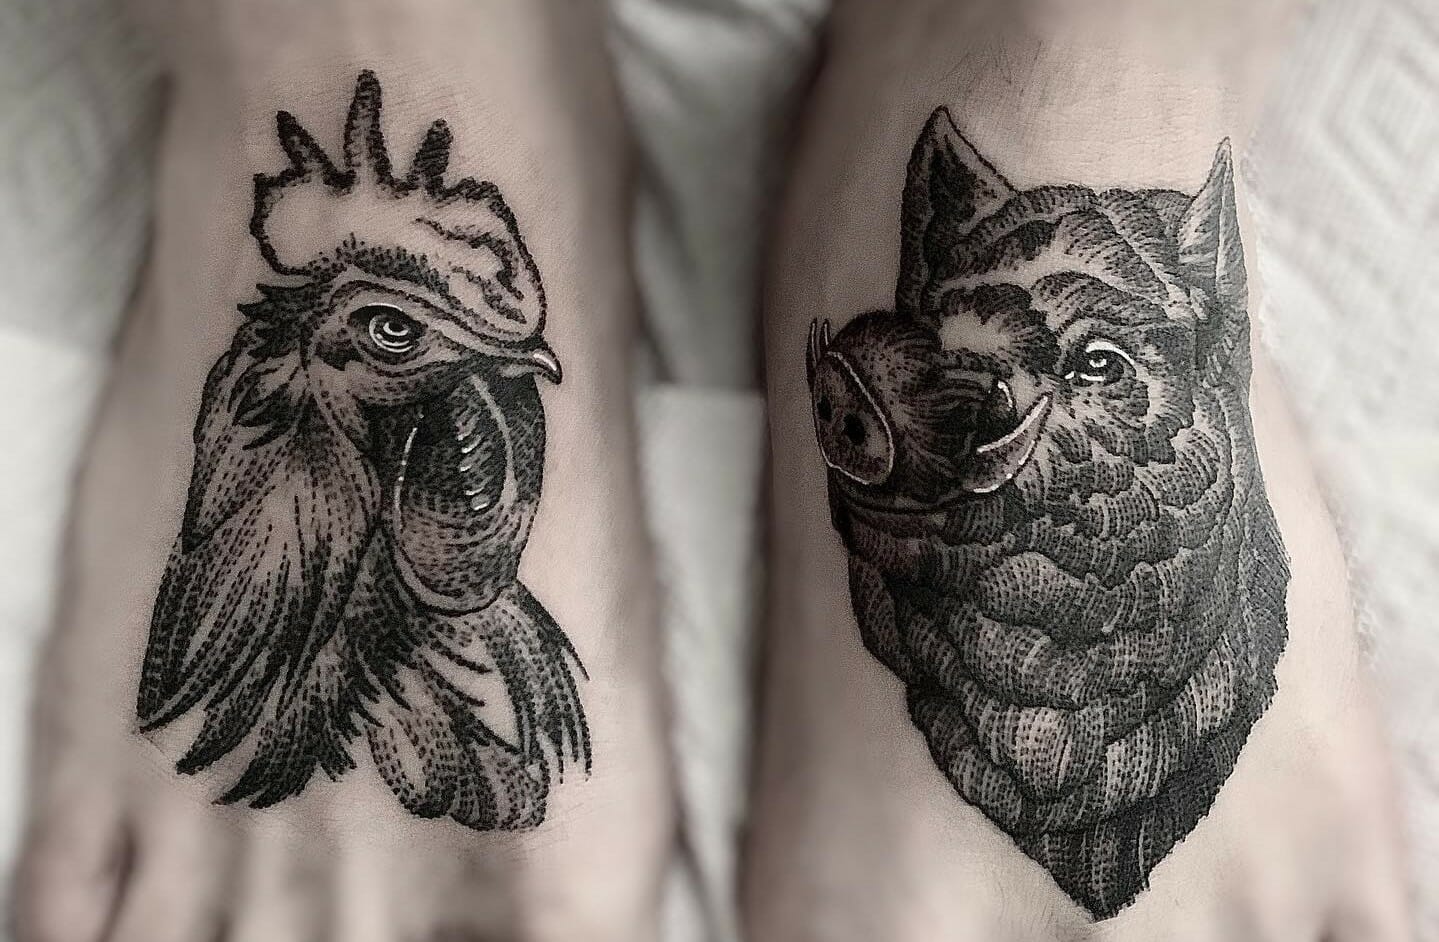 10 Best Pig and Rooster Tattoo Ideas That Will Blow Your Mind!

+2023